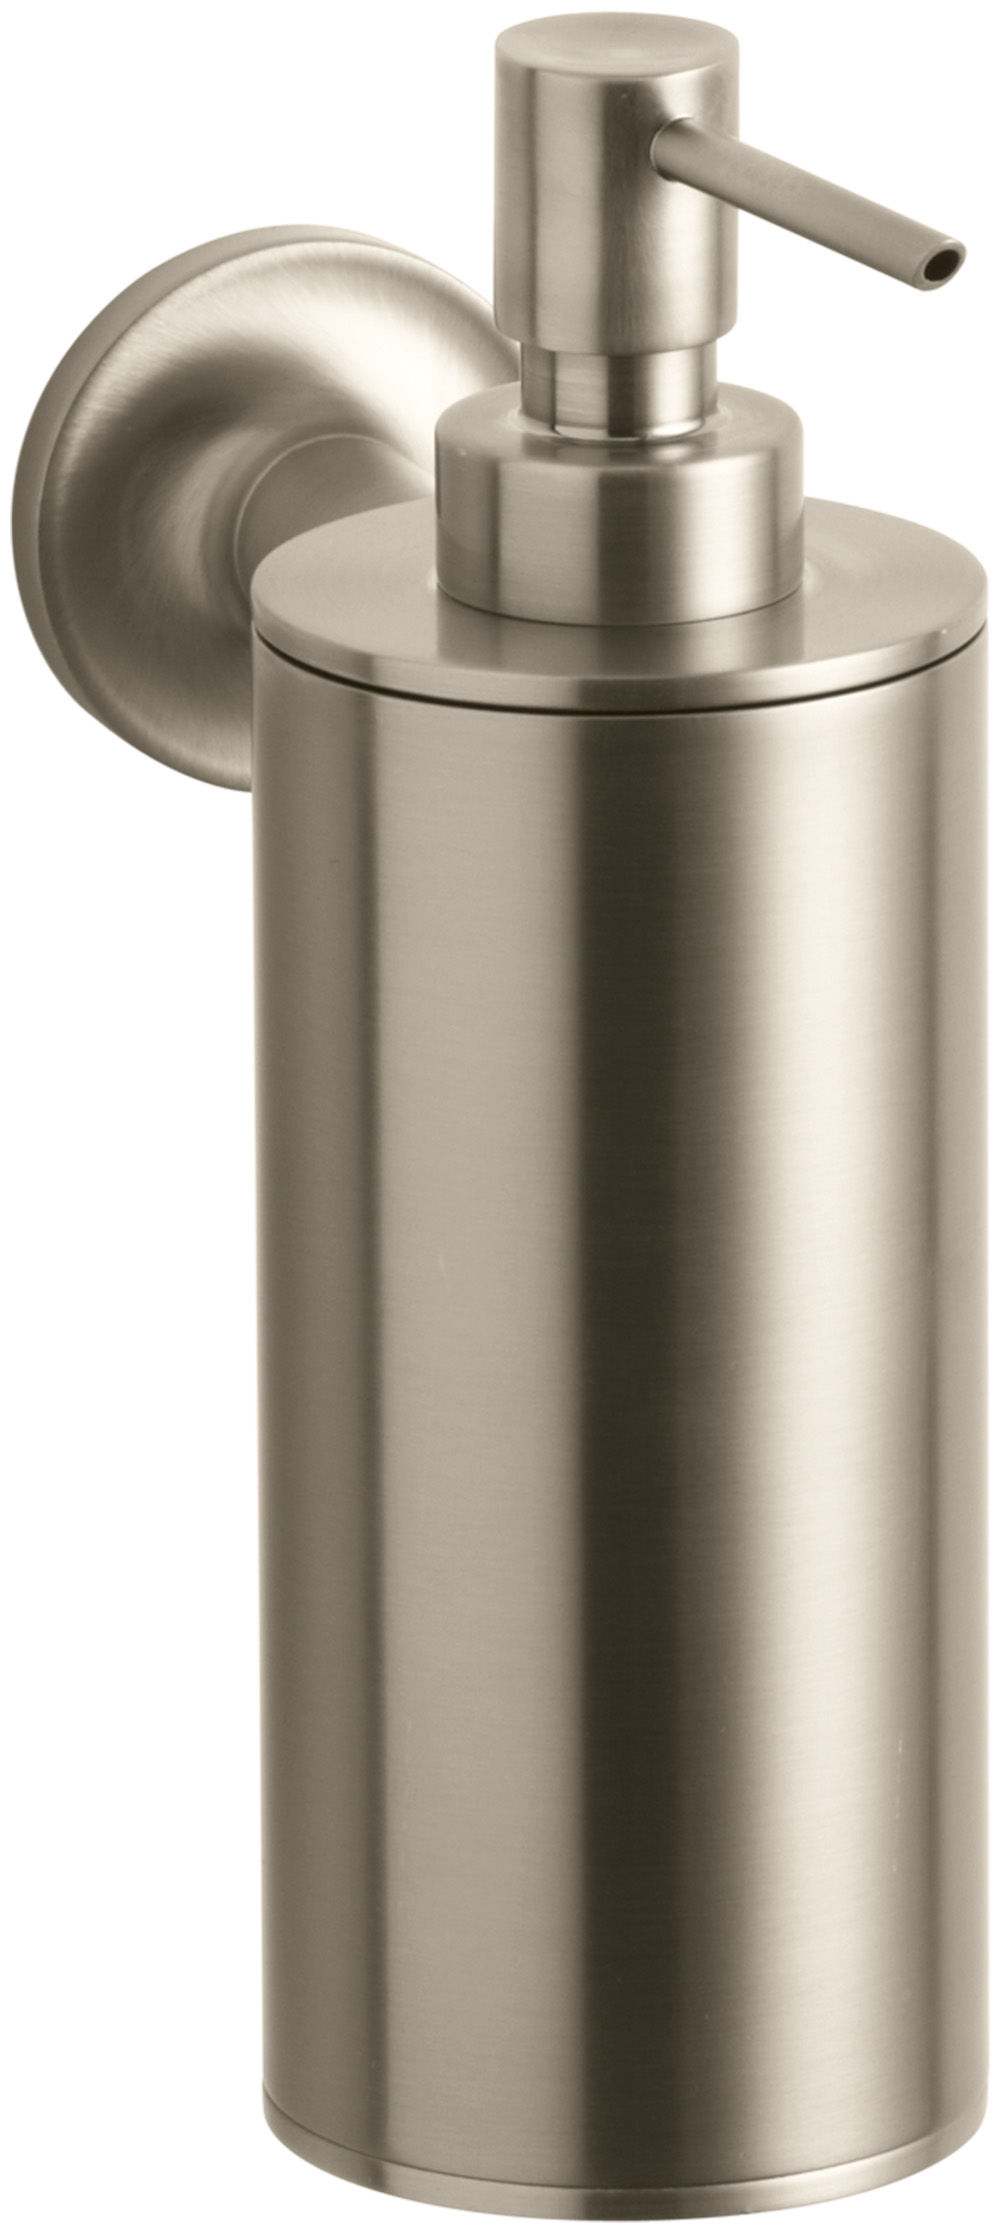 Kohler K Bn Vibrant Brushed Nickel Purist Wall Mounted Soap Dispenser With 8 Oz Capacity Faucet Com